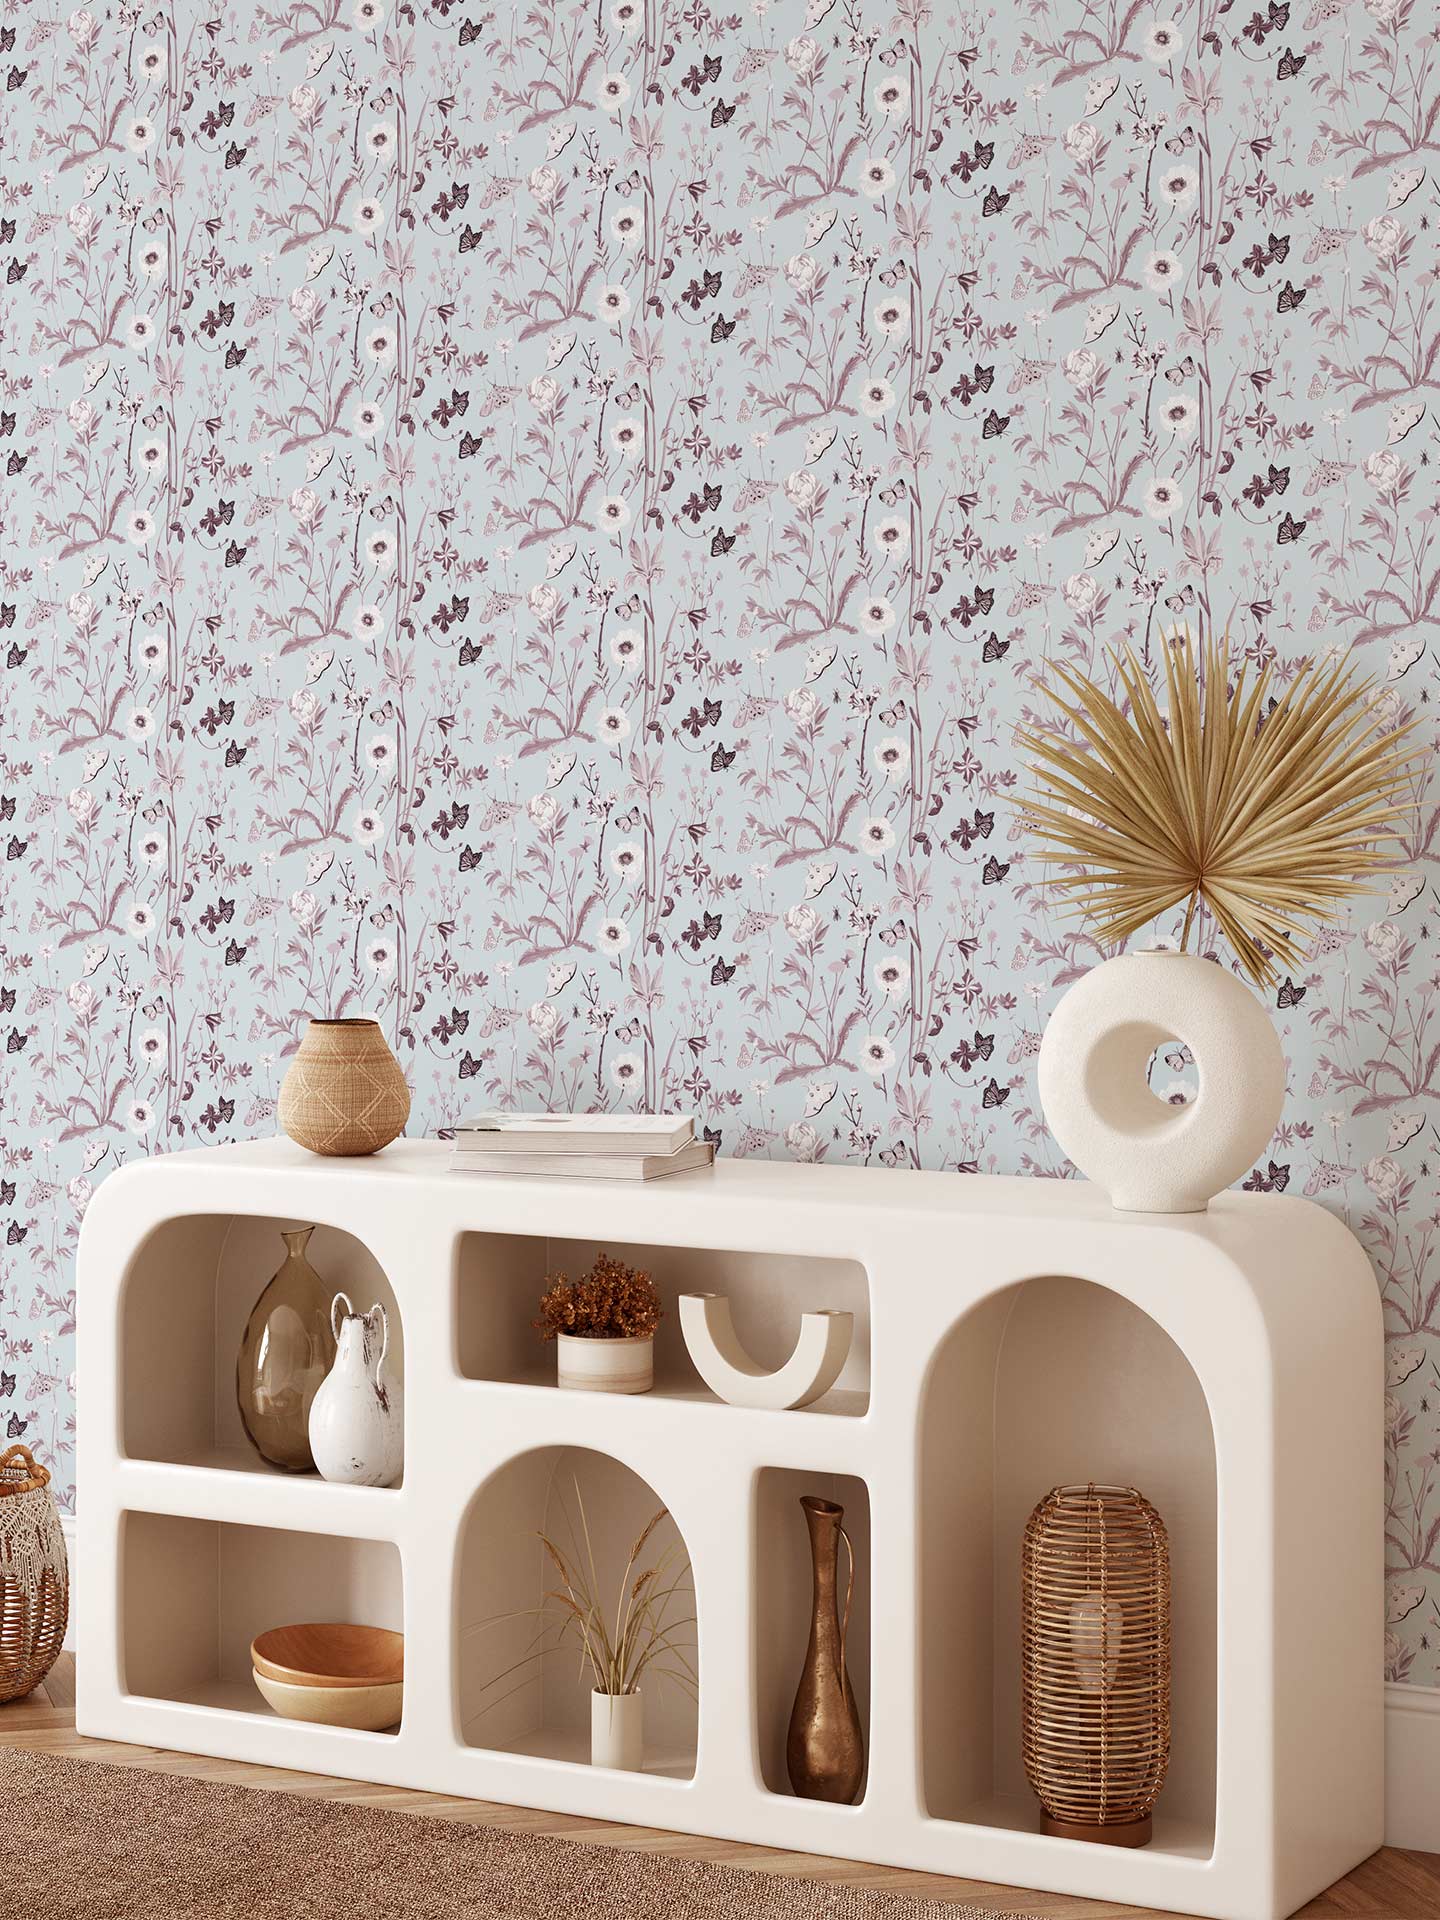 Midsommar is a minimalist wallpaper by Opposite Wall of a collection of butterflies and wildflowers.